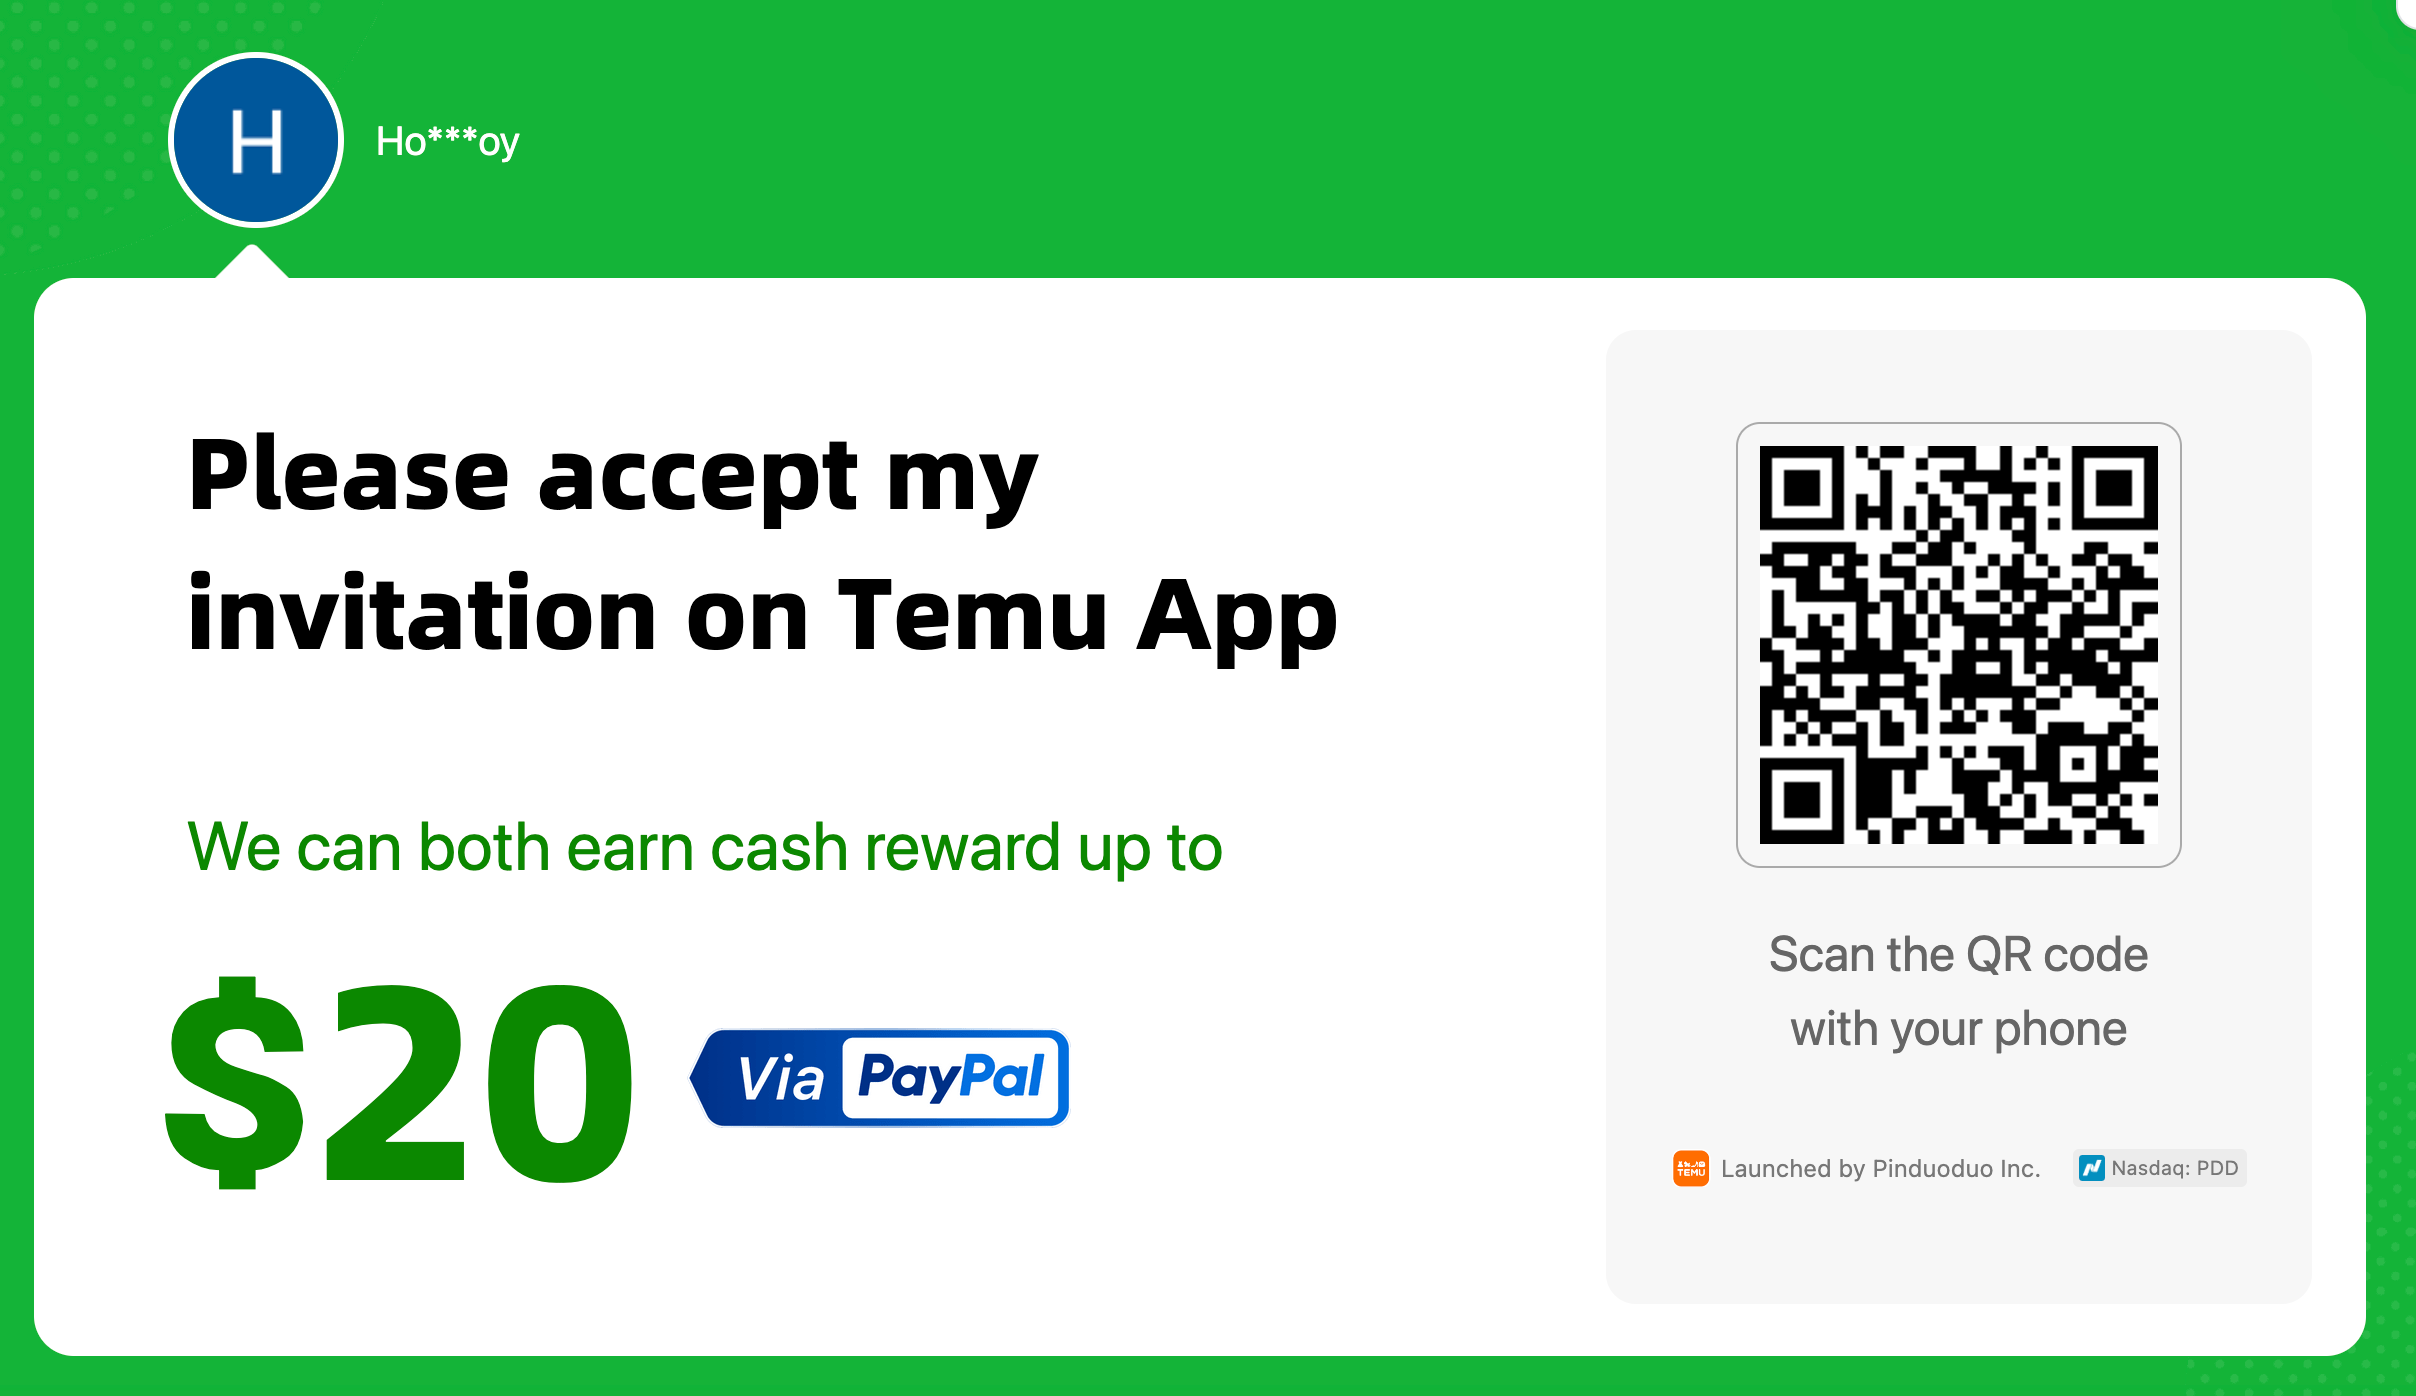 What you need to know about Temu, the online shopping app dominating  download charts